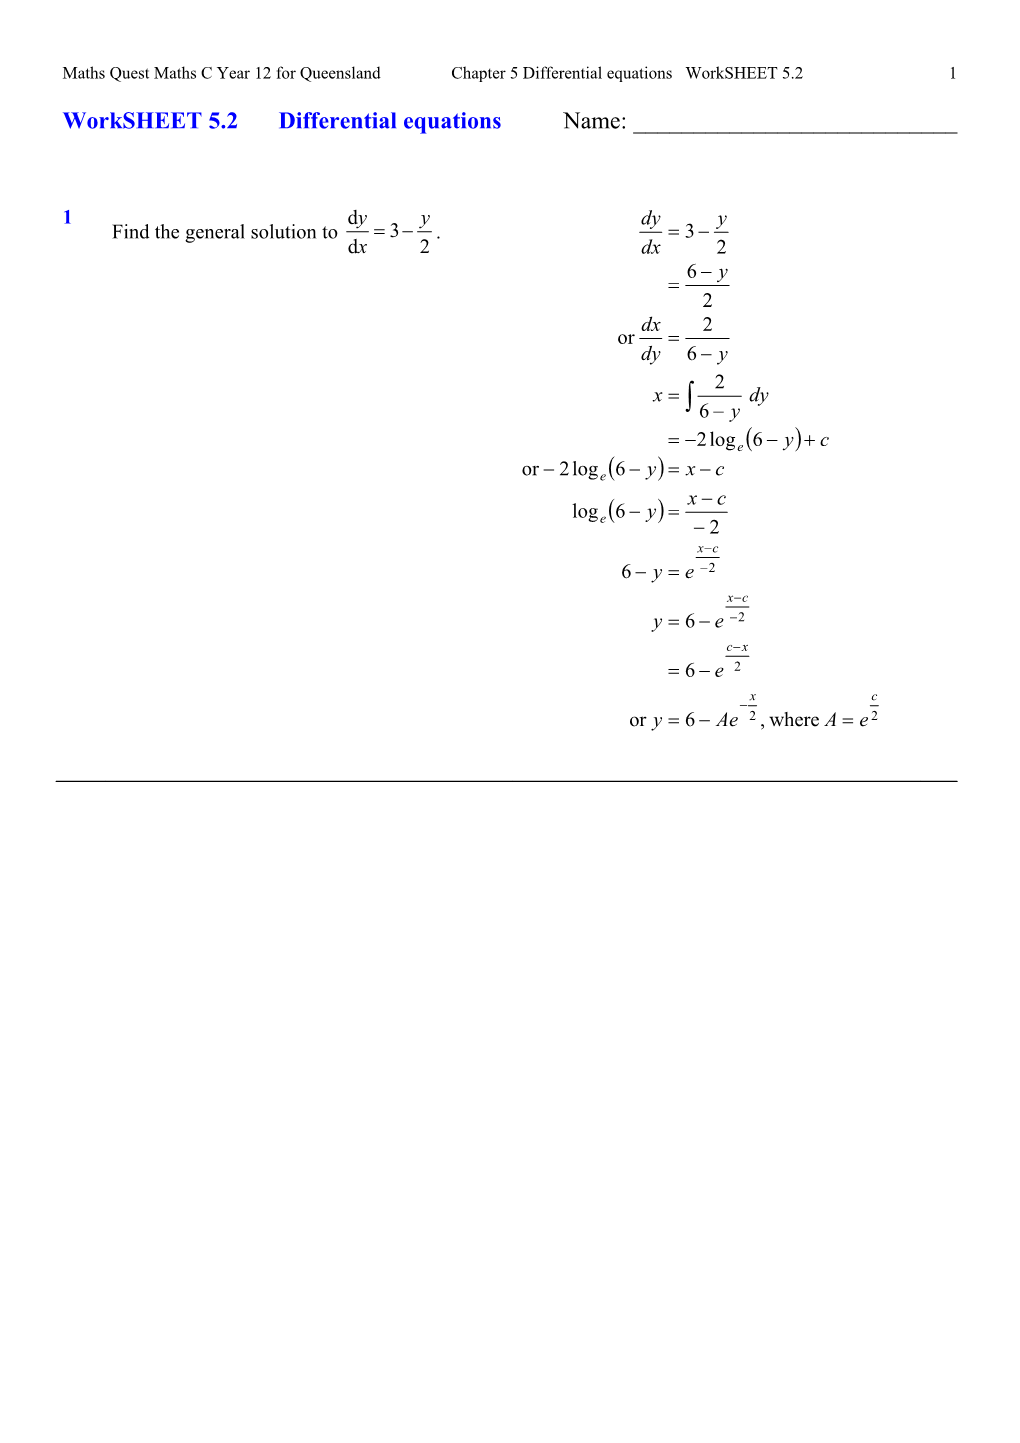 Maths Quest Maths C Year 12 for Queenslandchapter 5 Differential Equations Worksheet 5.21